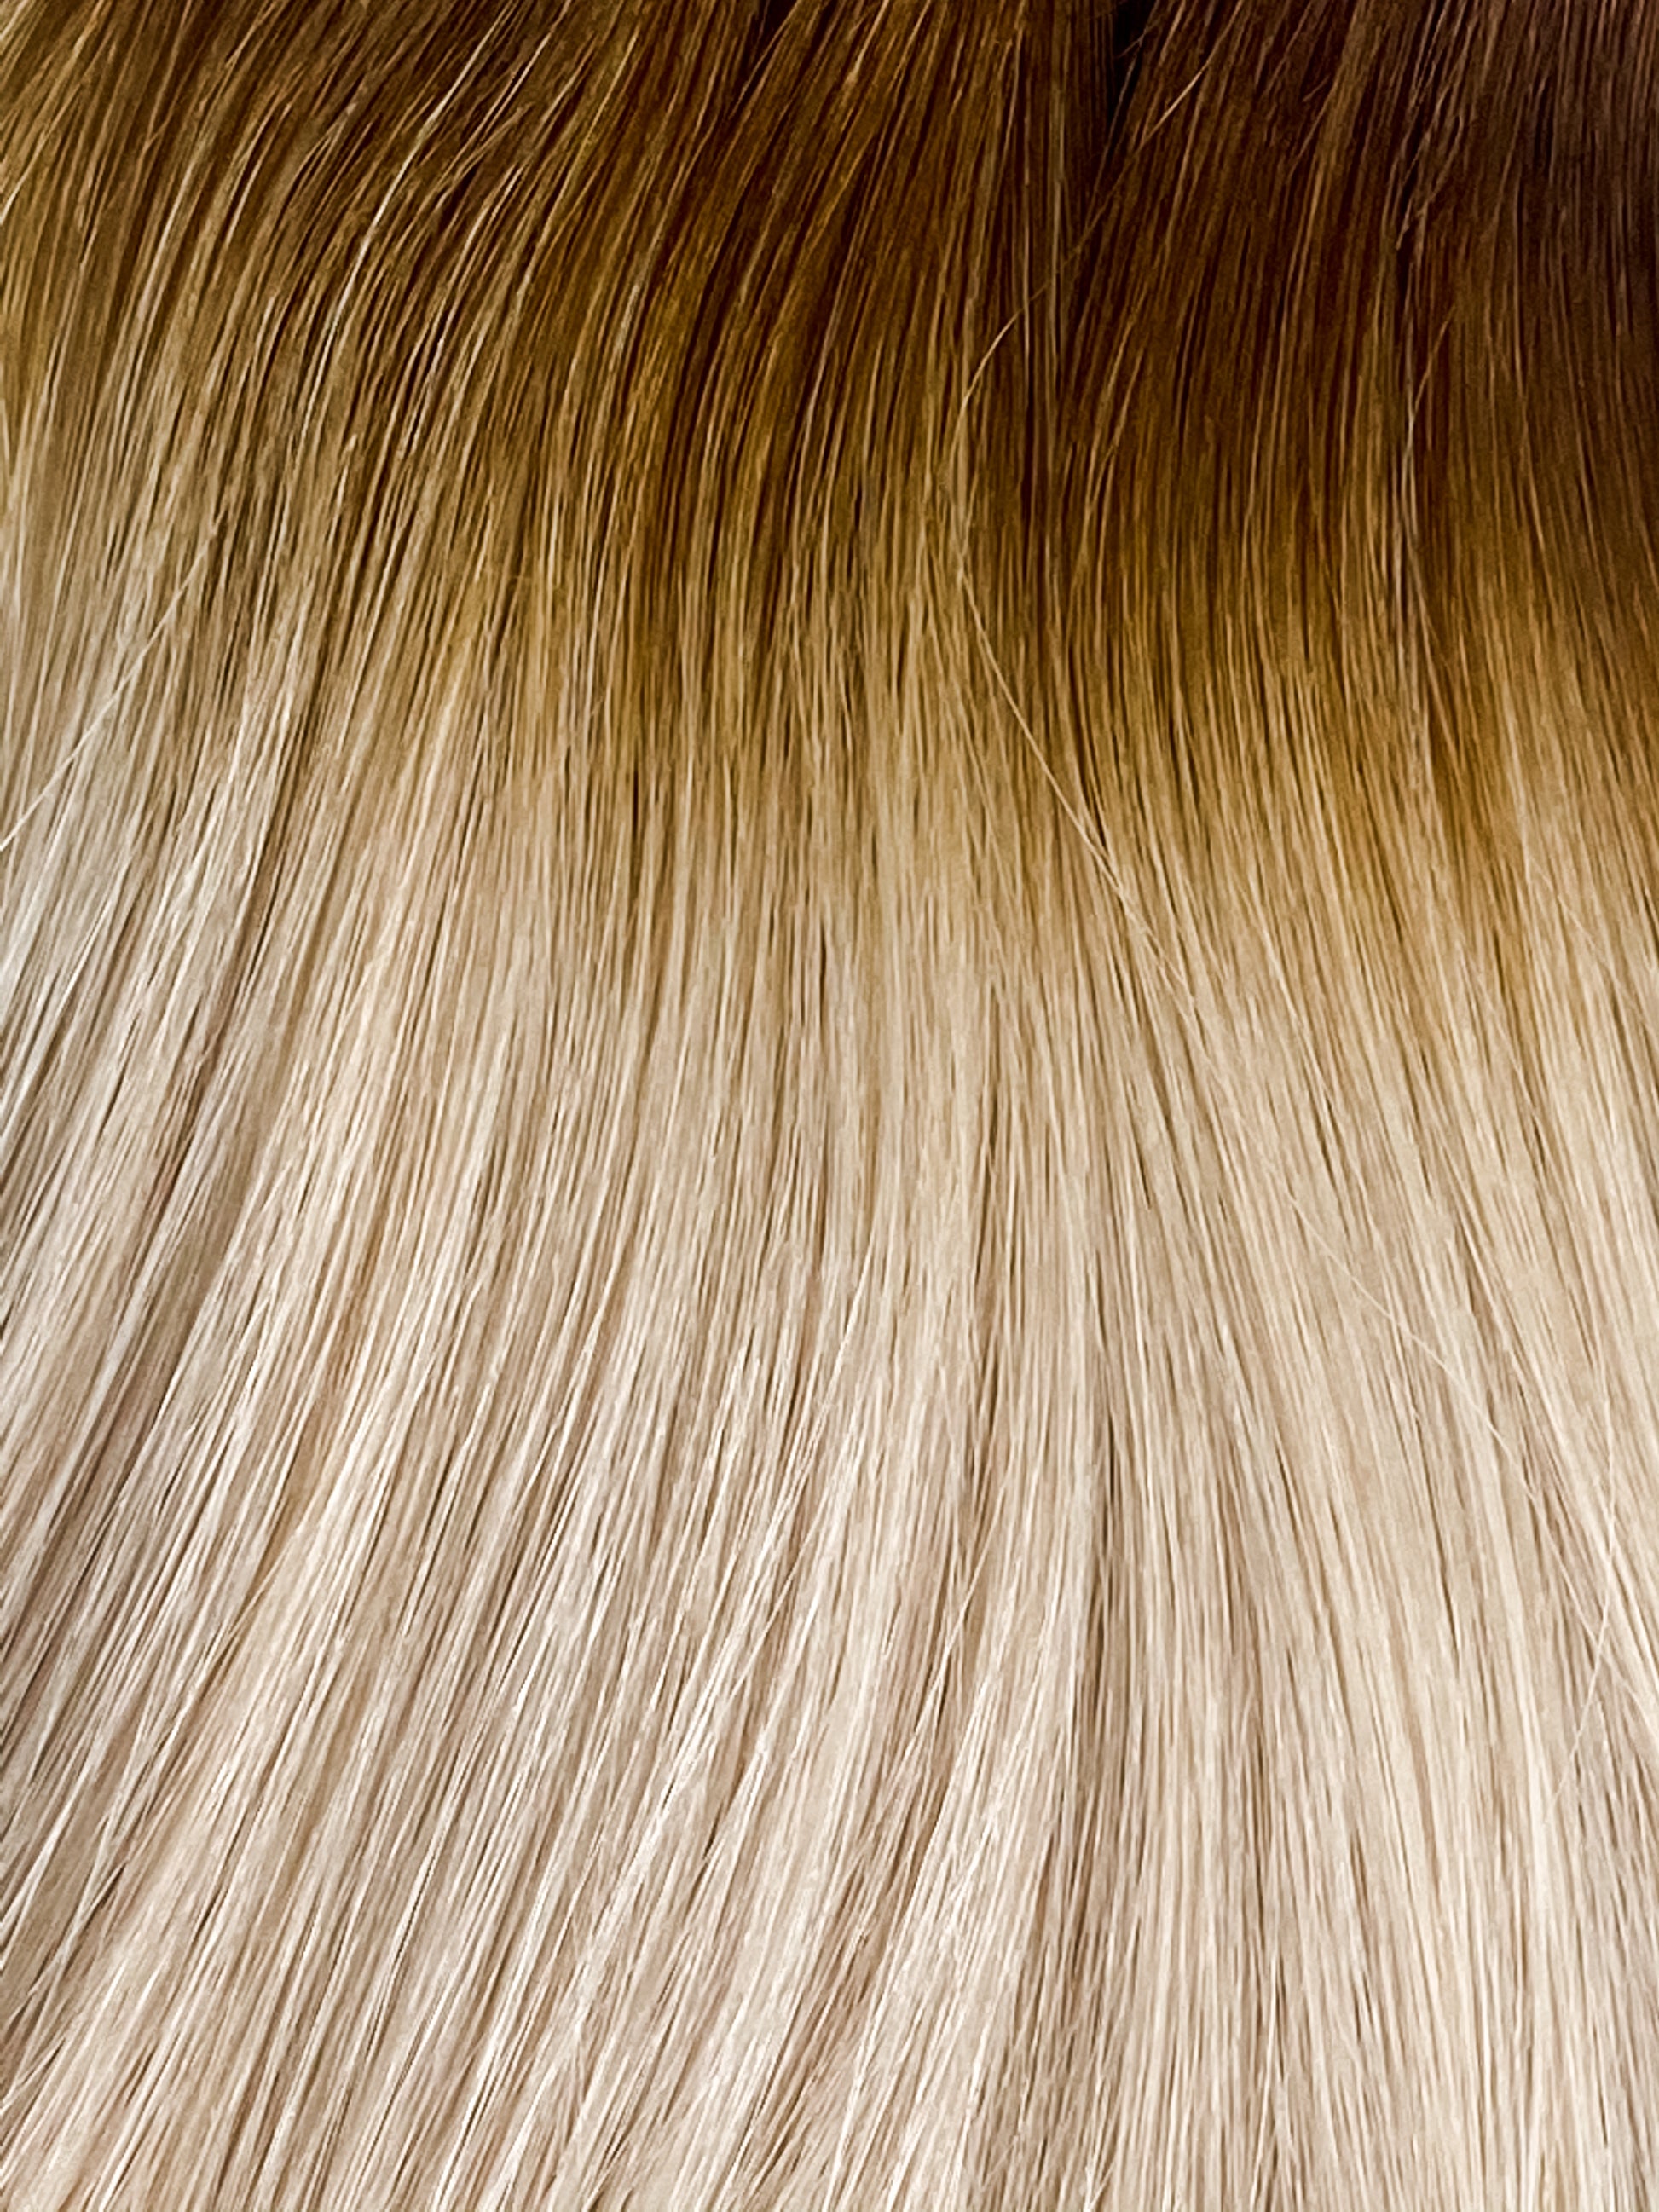 premium blondes aaaaa+ weft hair-root smudge t6/60a  light chestnut brown & ash blonde mids and ends 20 inch